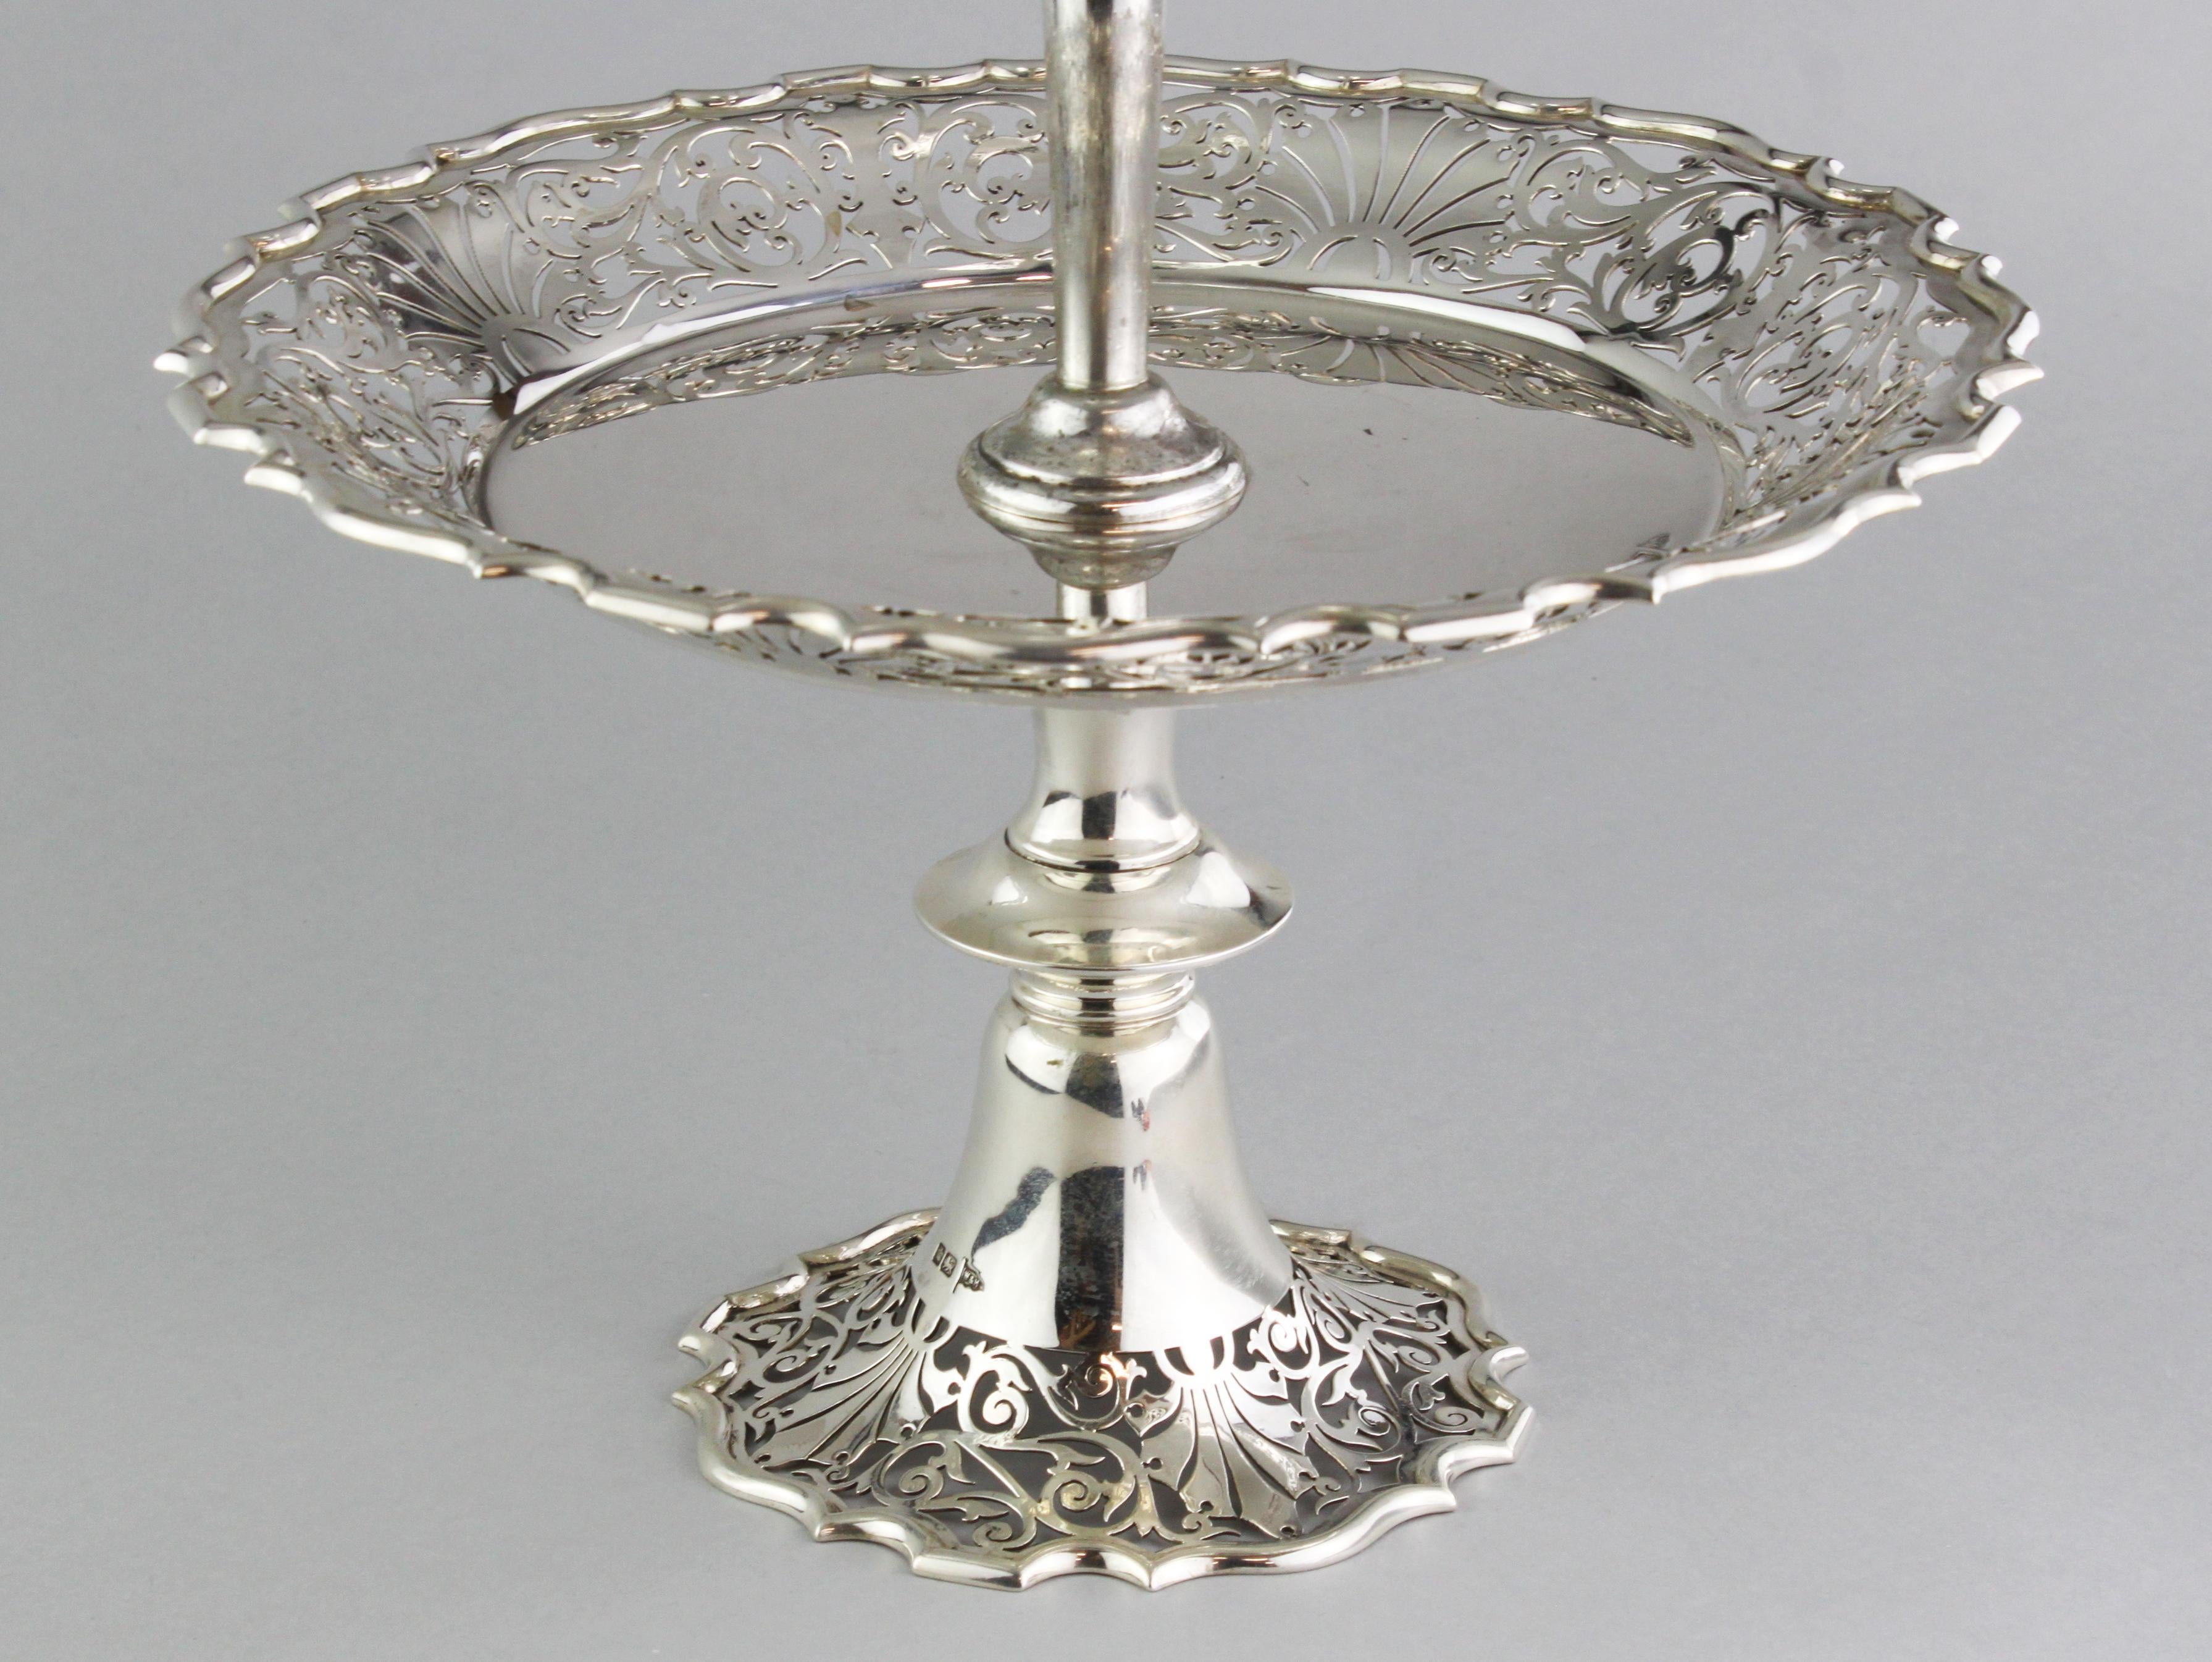 Early 20th Century Antique Sterling Silver Tazza Dish with Vase, Walker & Hall, Sheffield, 1904